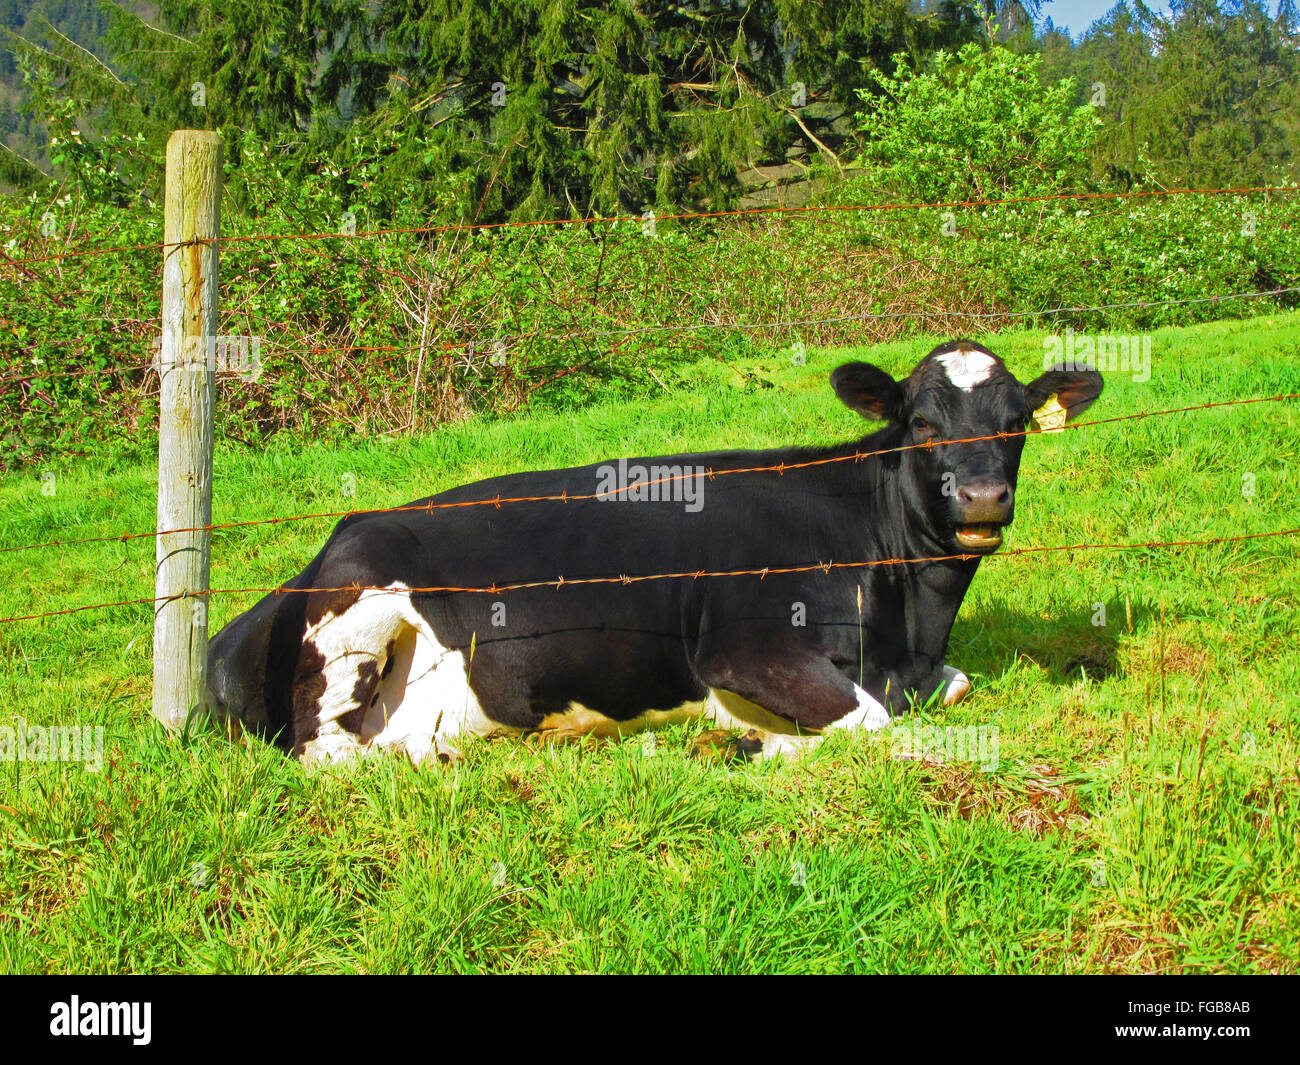 Portrait Of Cow Sitting On Grassy Field Against Trees Seen Through Fence Stock Photo